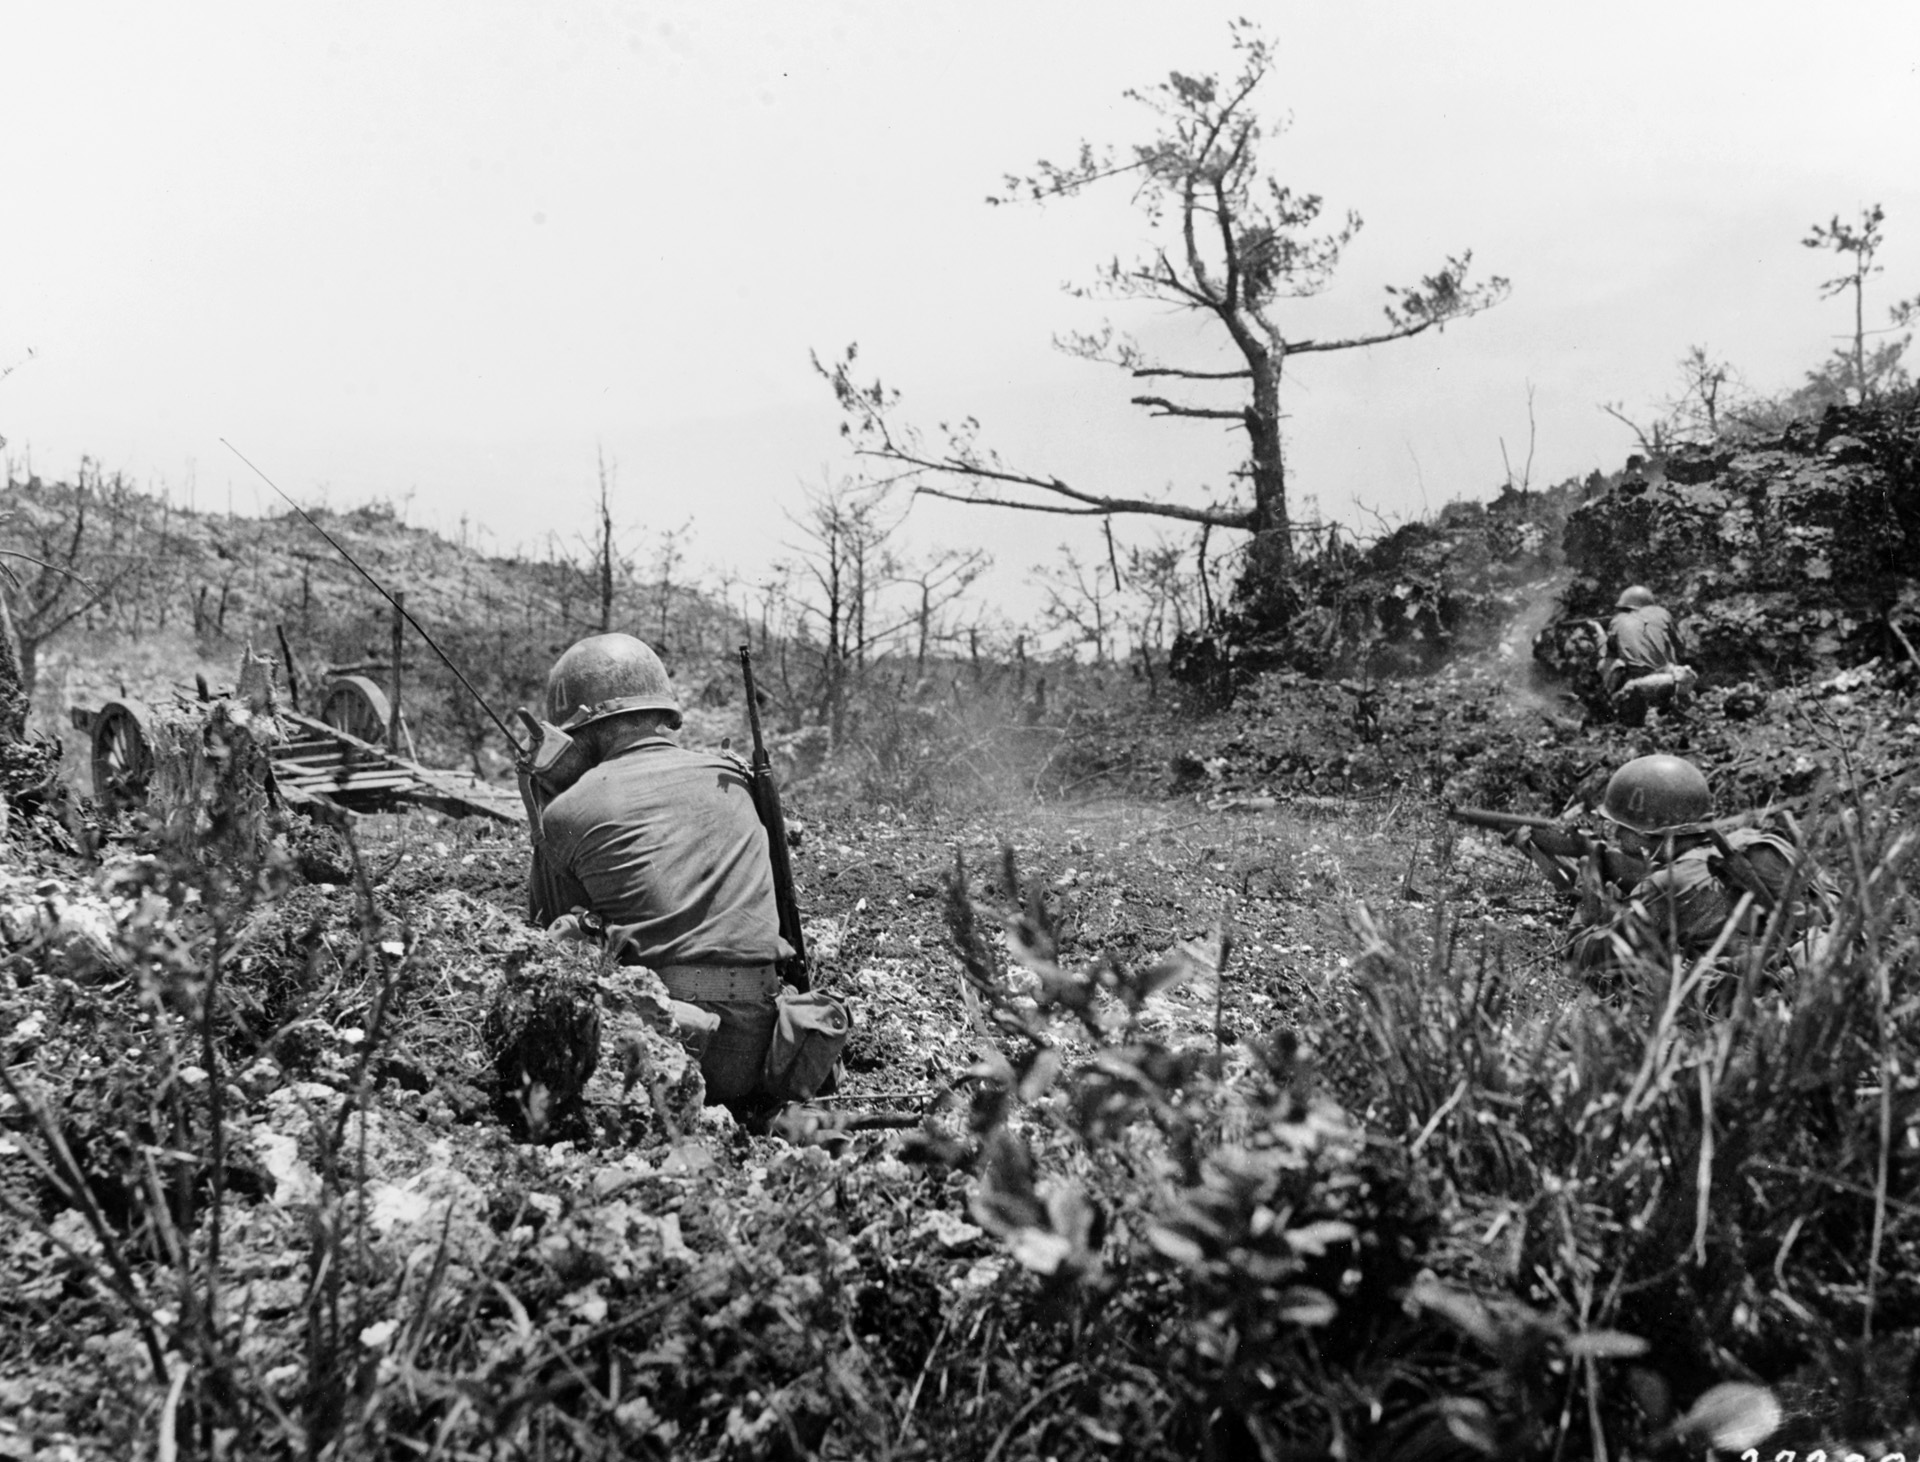 An American radio operator relays the progress of an attack against well entrenched Japanese troops on Okinawa as infantrymen from the Army’s 77th Division fire on a fortified position carved into an escarpment.